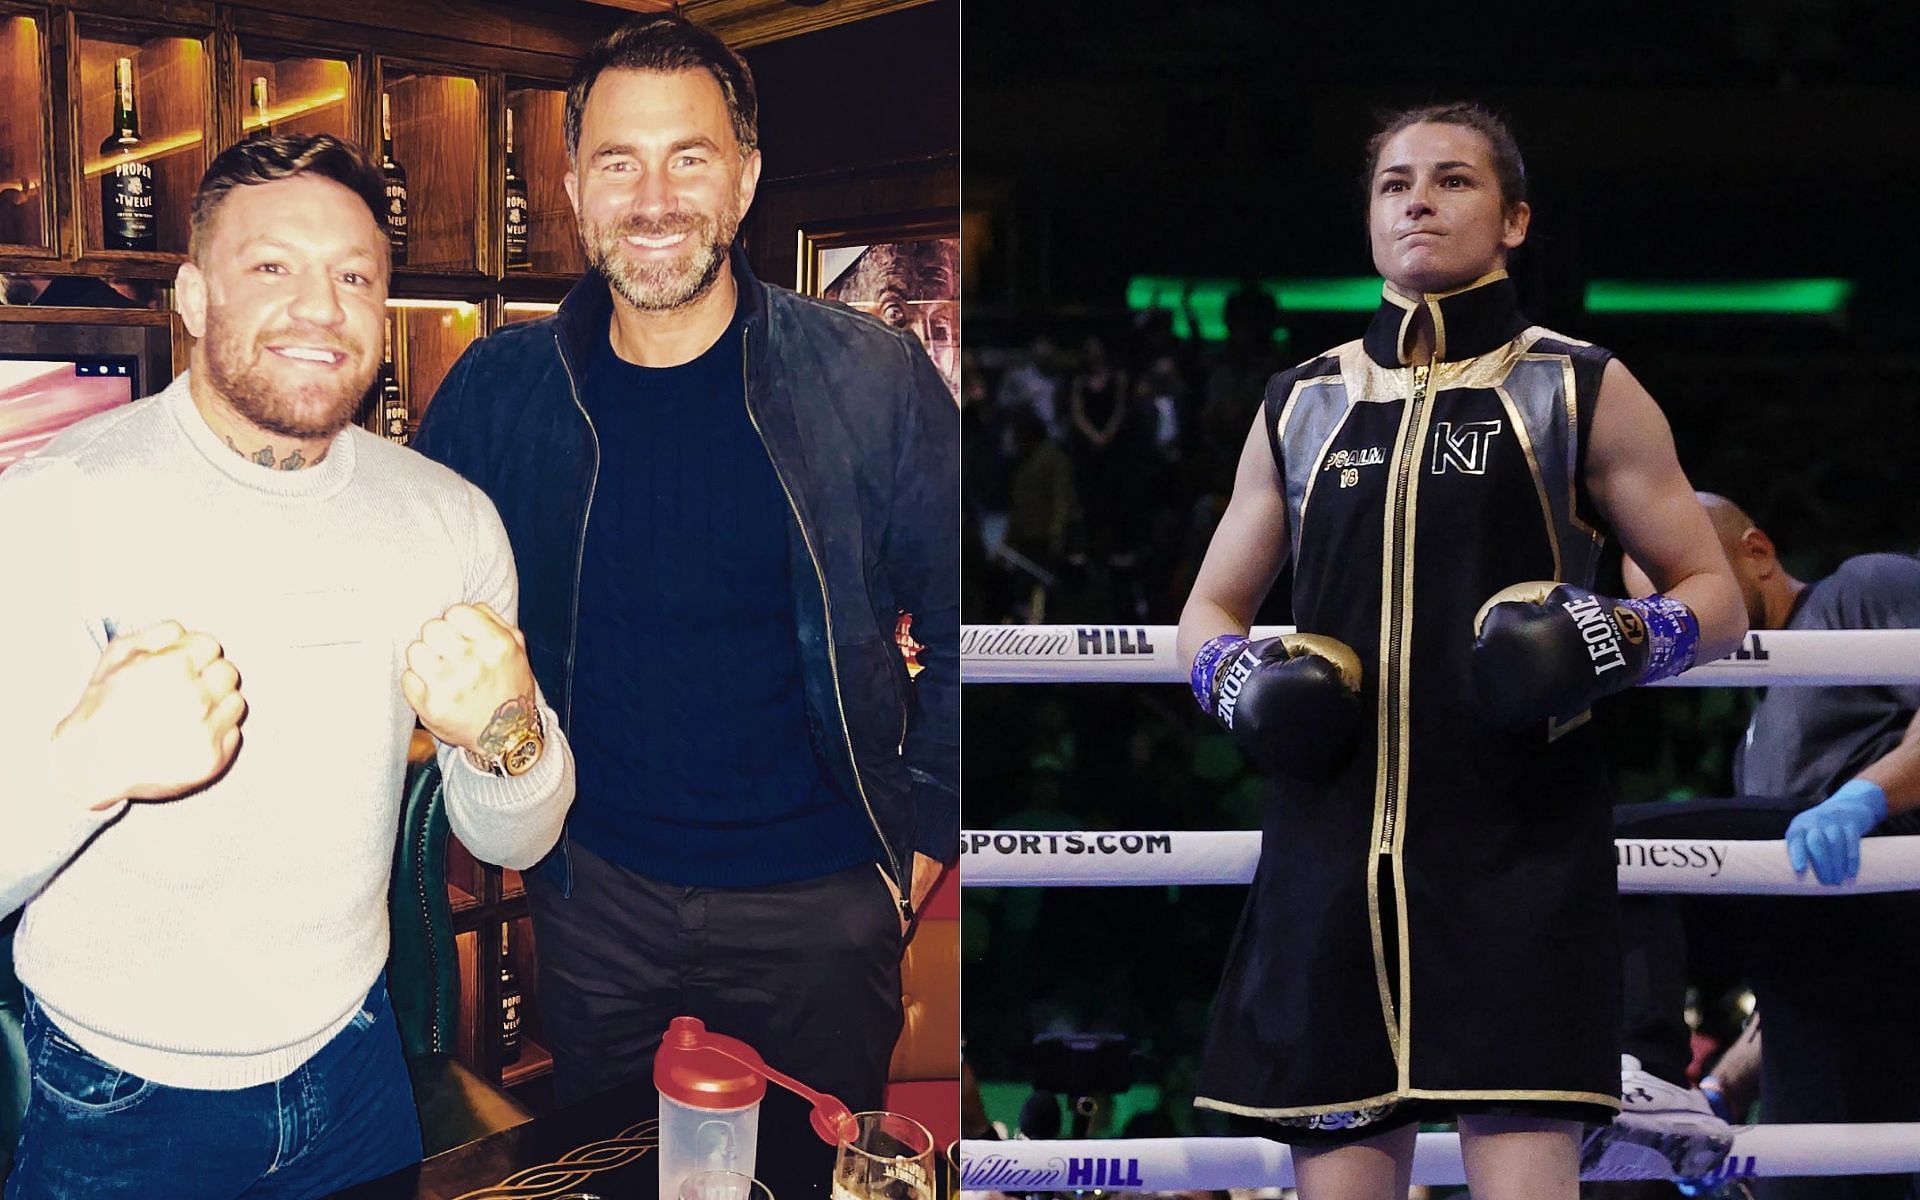 Conor McGregor &amp; Eddie Hearn (left) and Katie Taylor (right) [Image credits: @EddieHearn on Twitter]